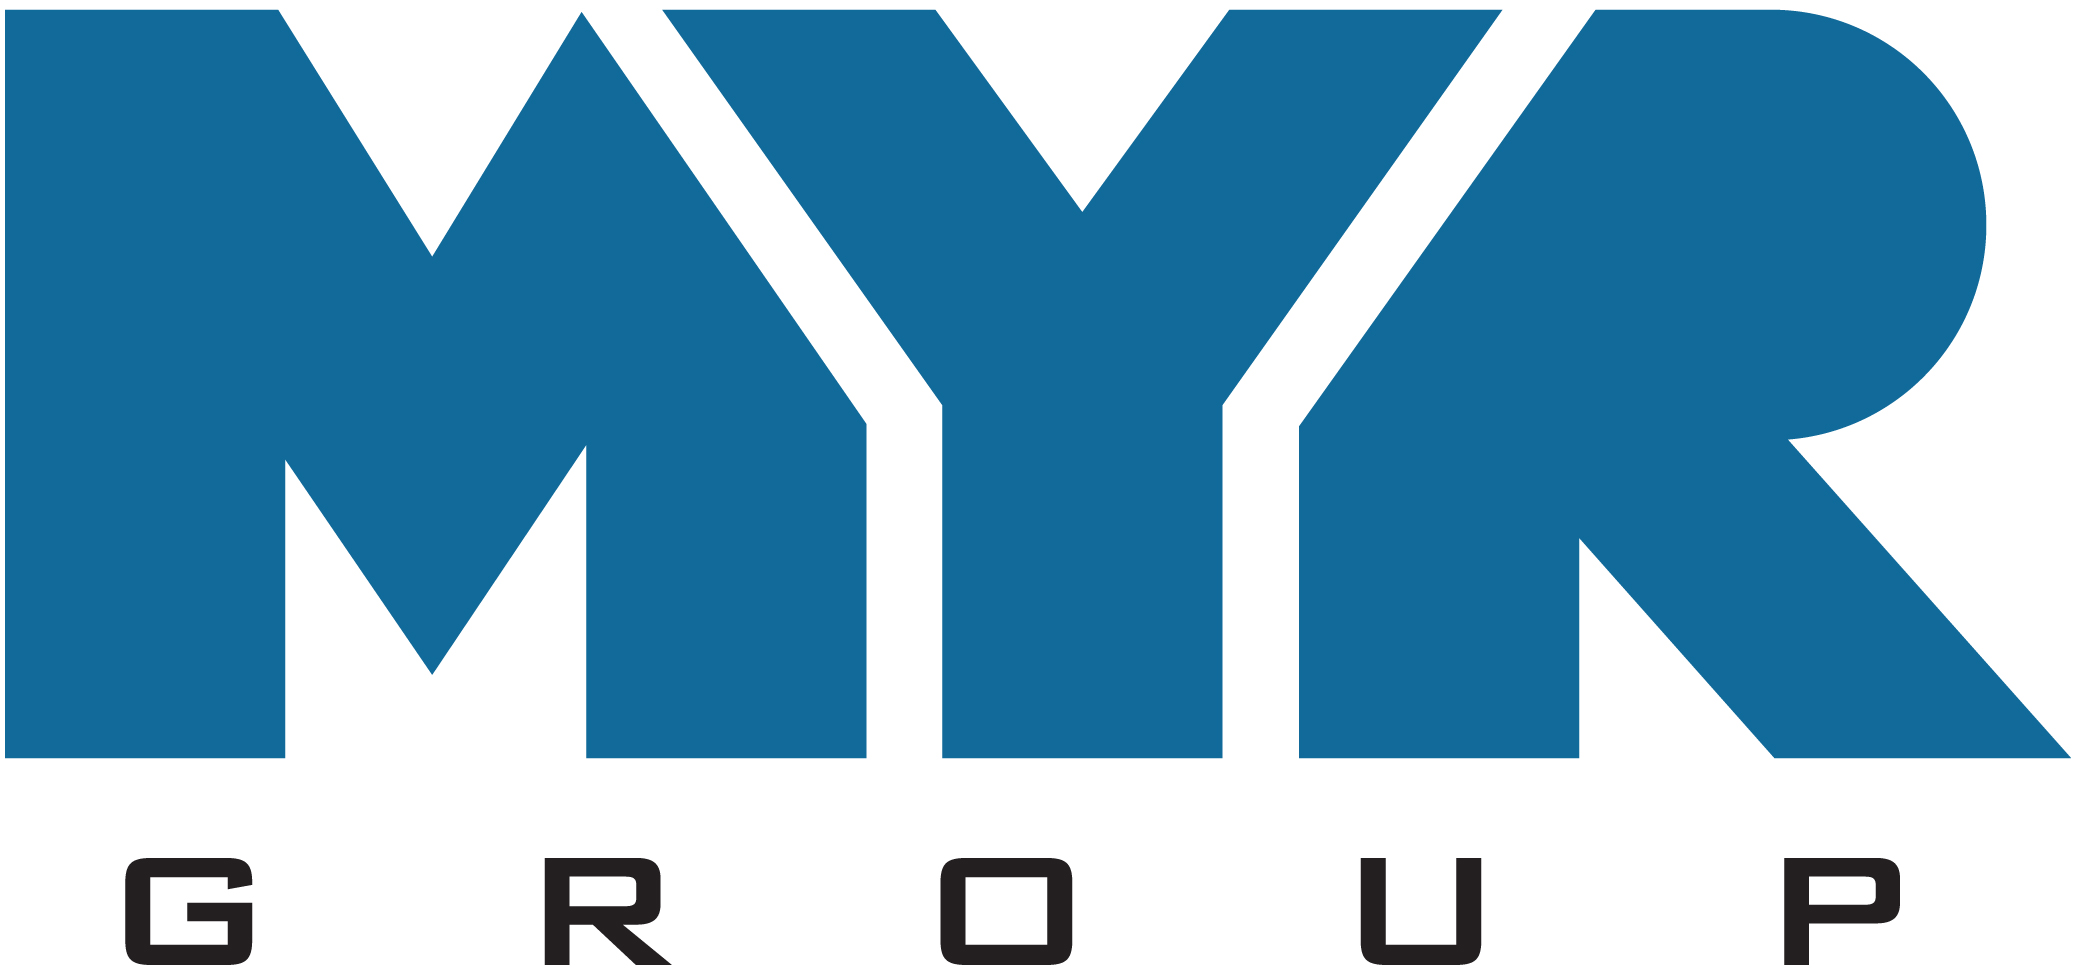 On behalf of the Board of Directors and management of MYR Group Inc., we ar...